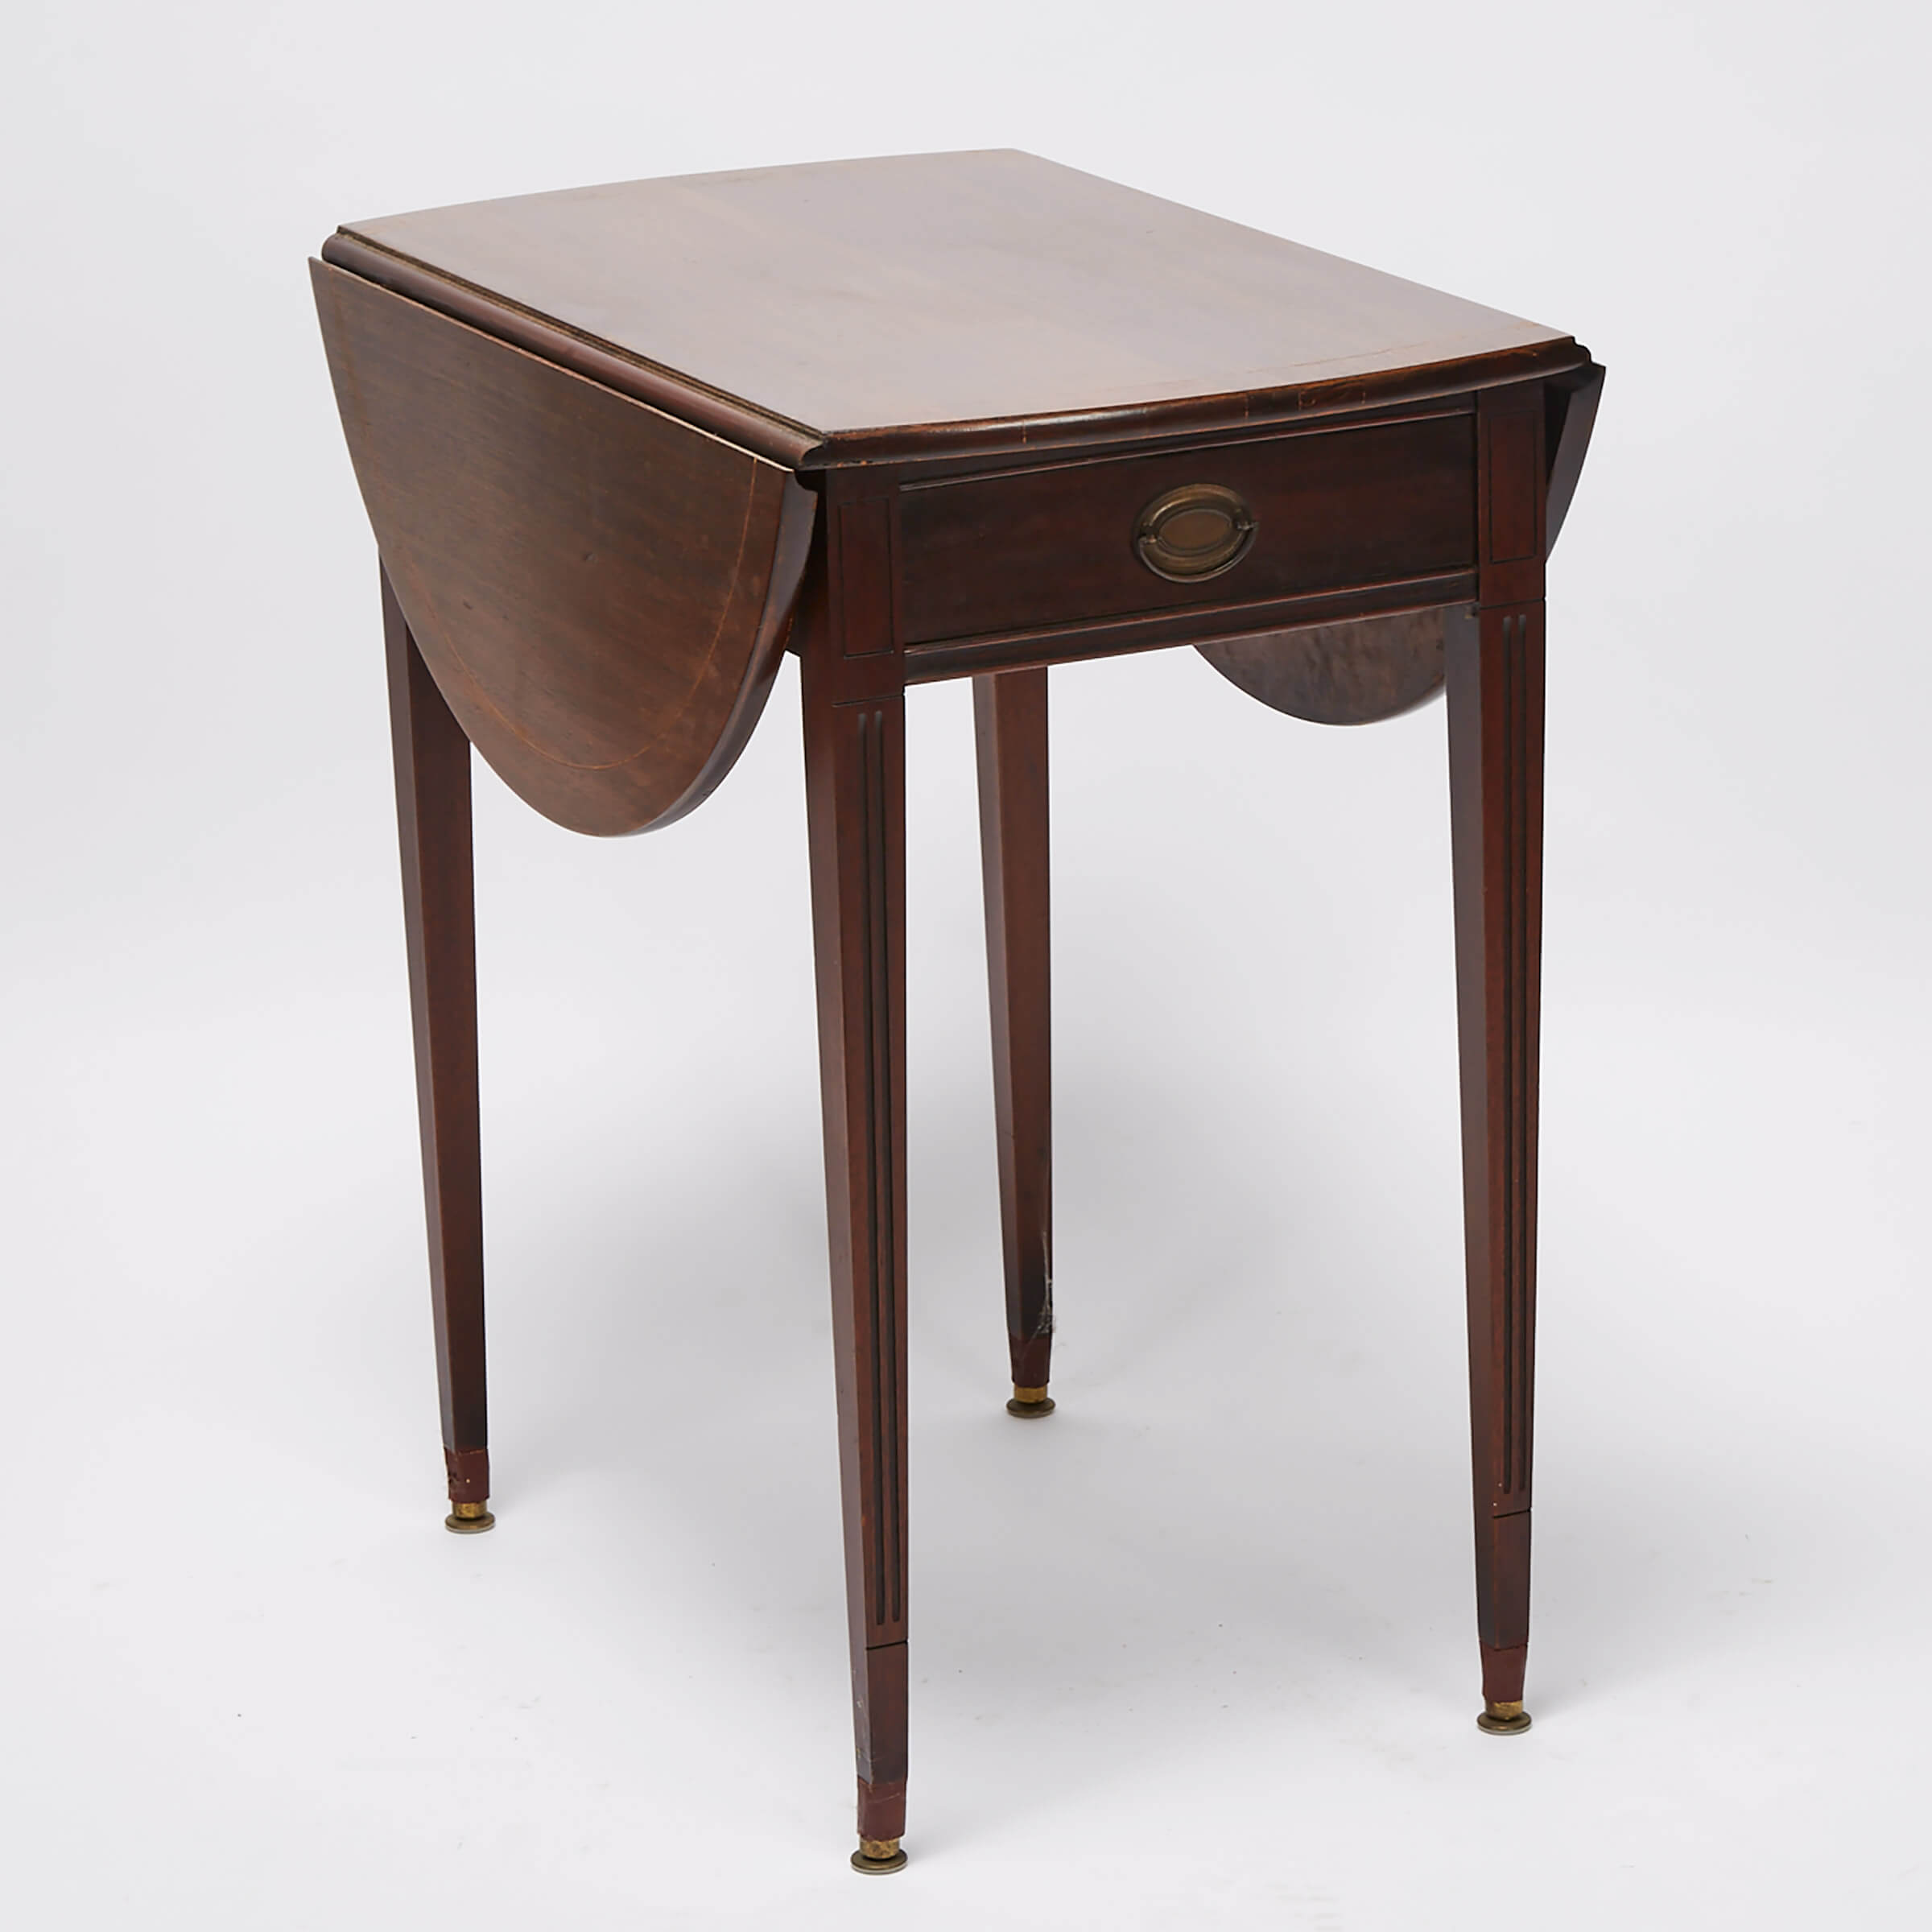 Regency Style Satinwood Strung Mahogany Oval Pembroke Table, early 20th century